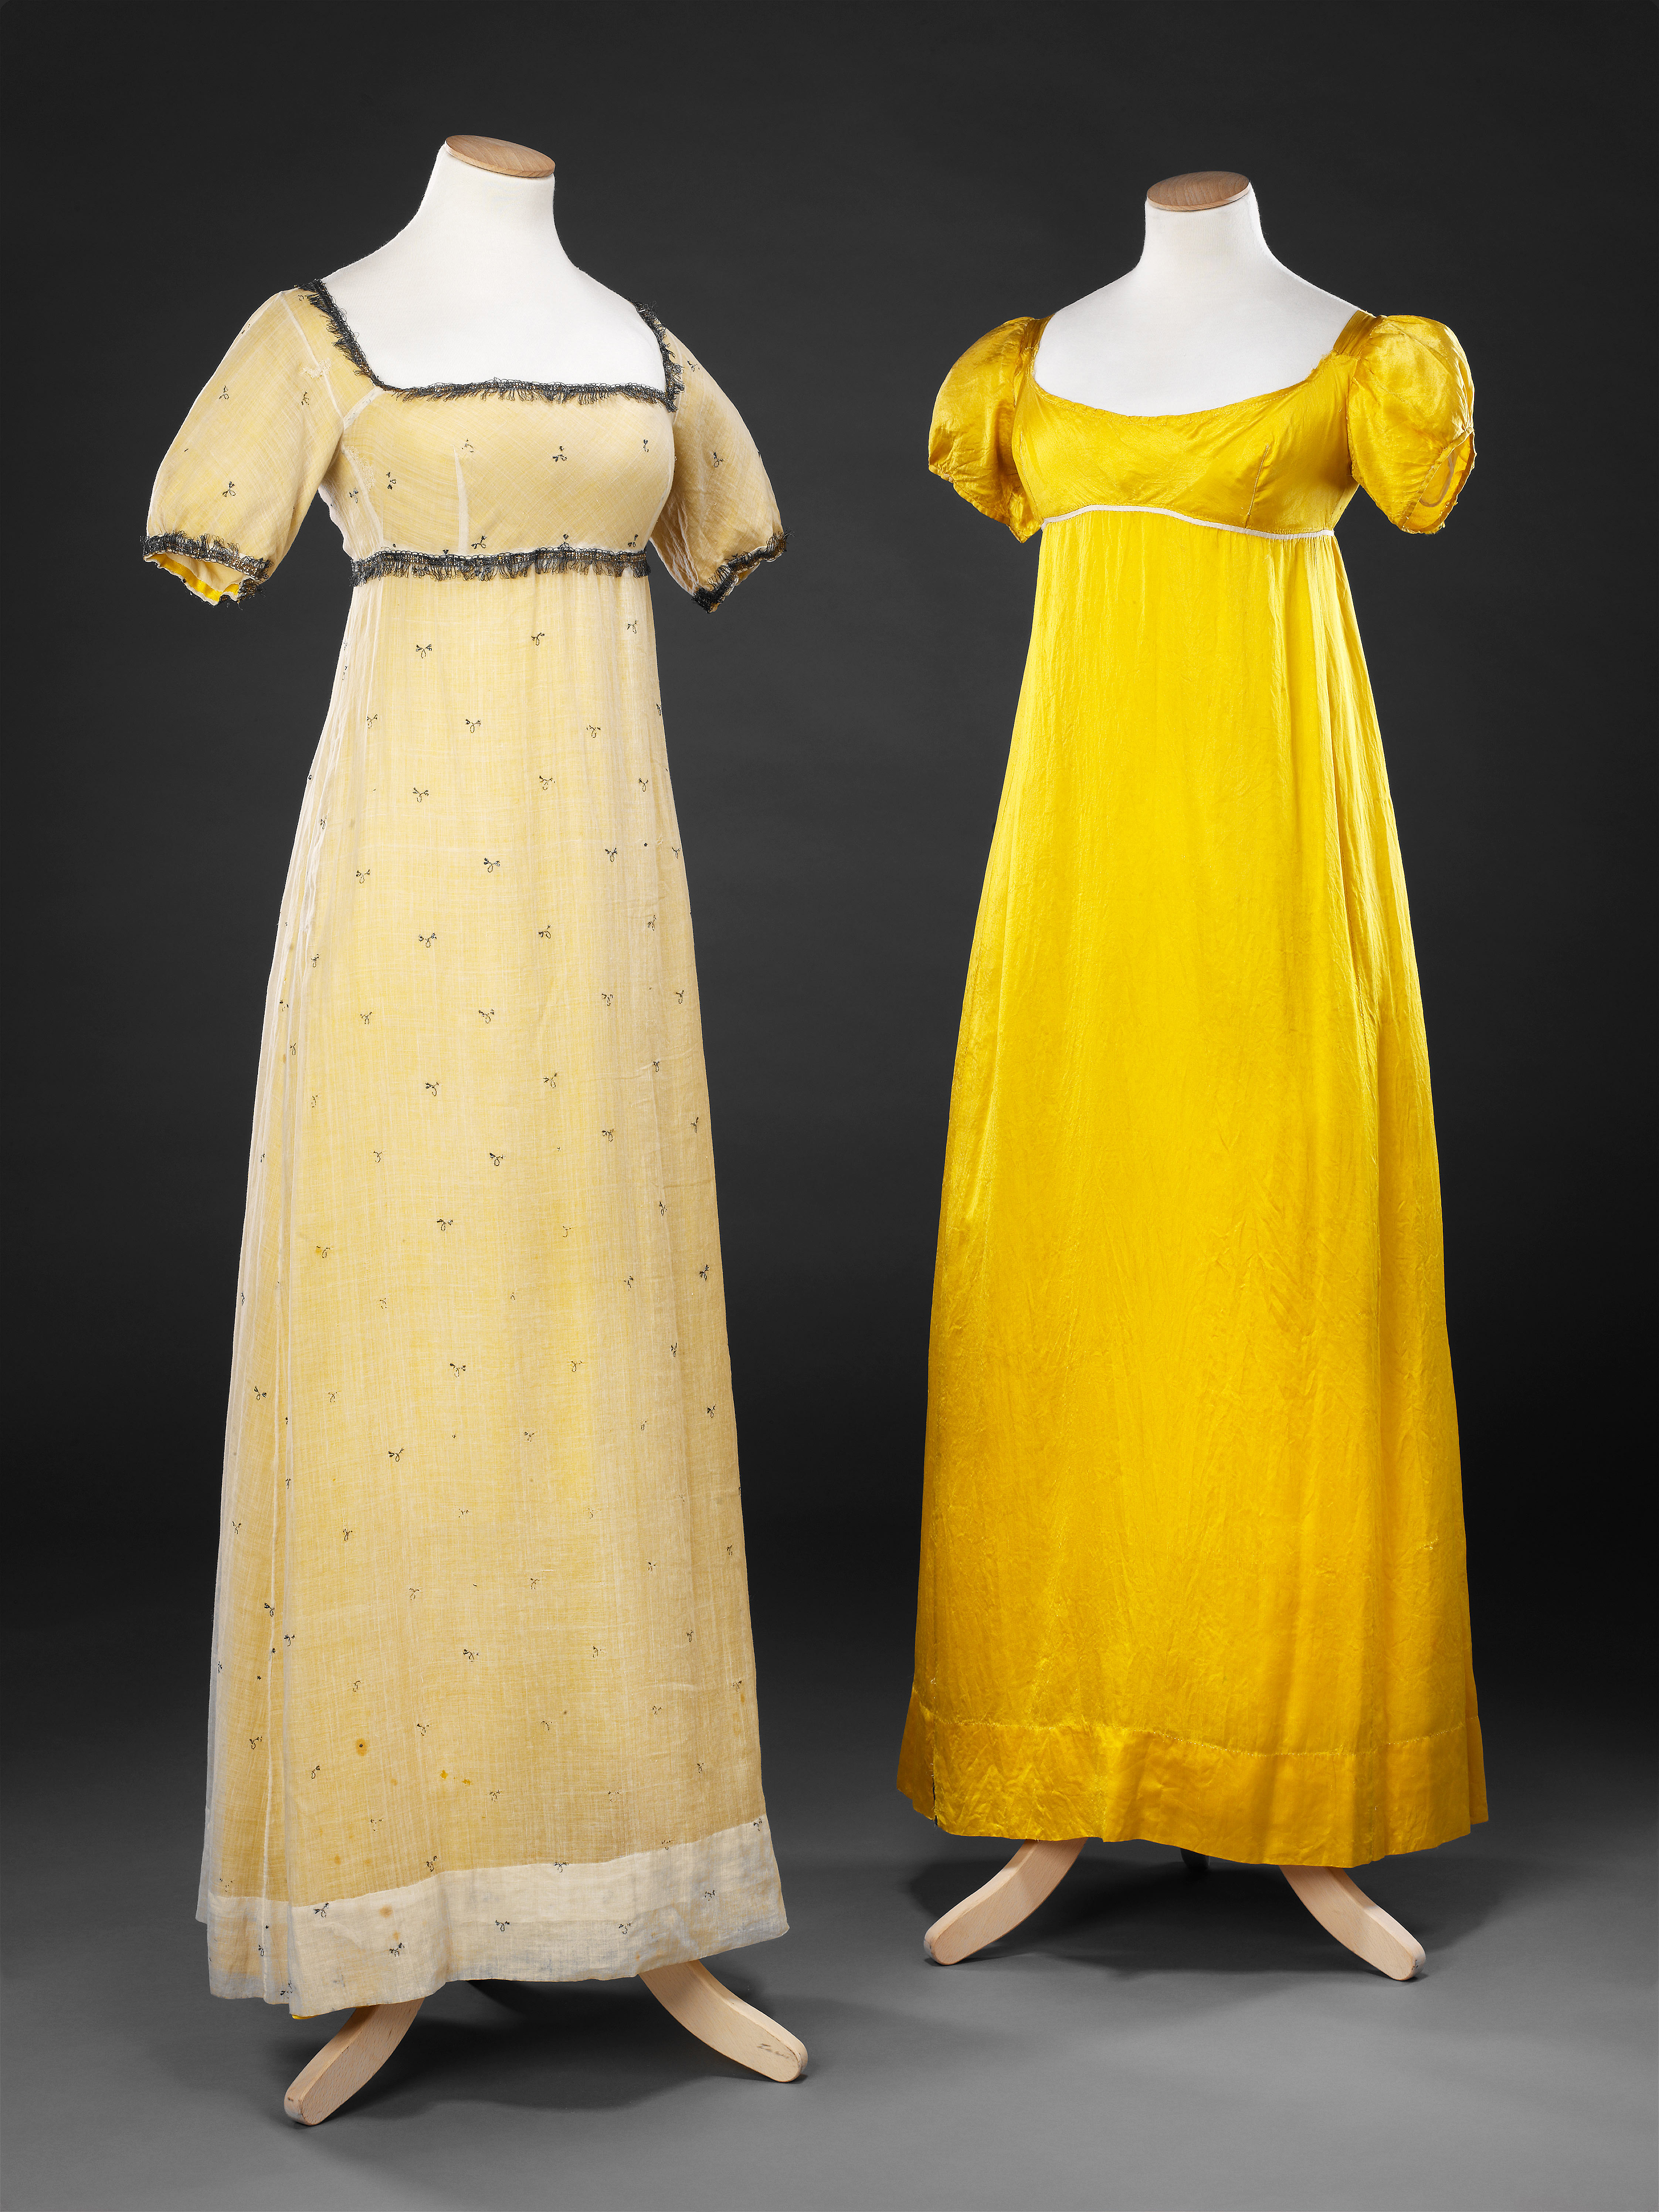 Dress c. 1810 and Underdress c. 1815 — The John Bright Collection